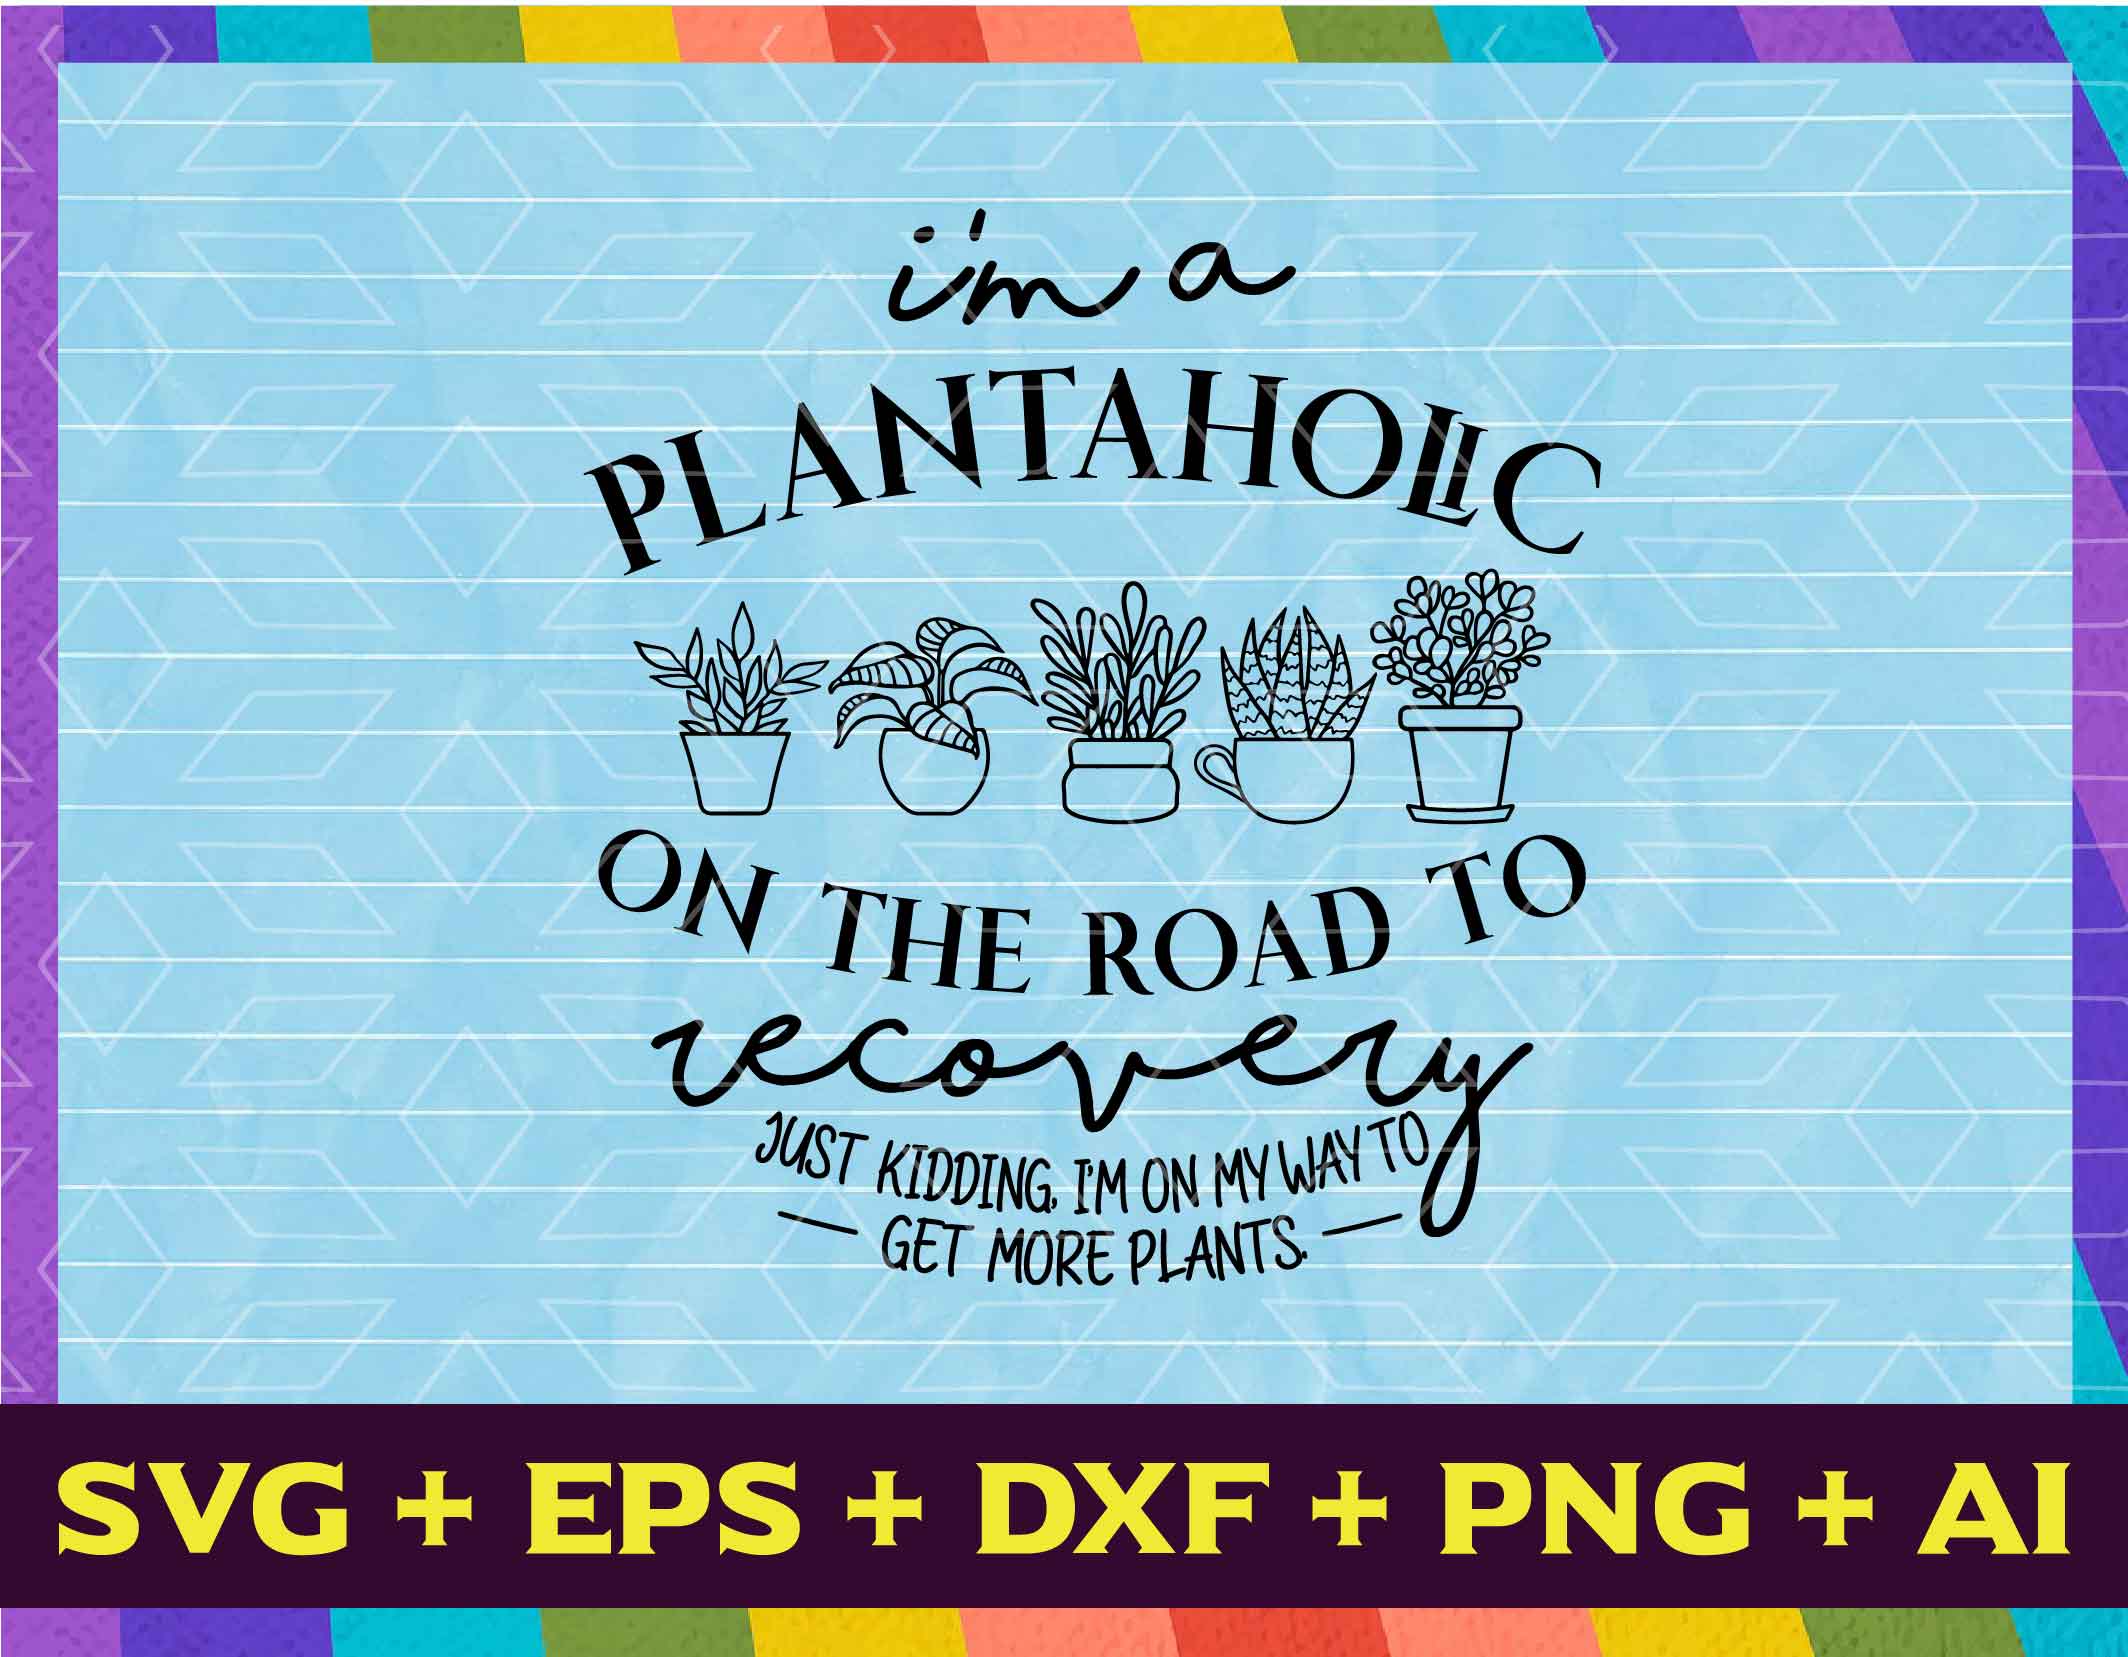 font 2 01 26 I'm a plantaholic on the road to recovery svg, png, eps, dxf, digital